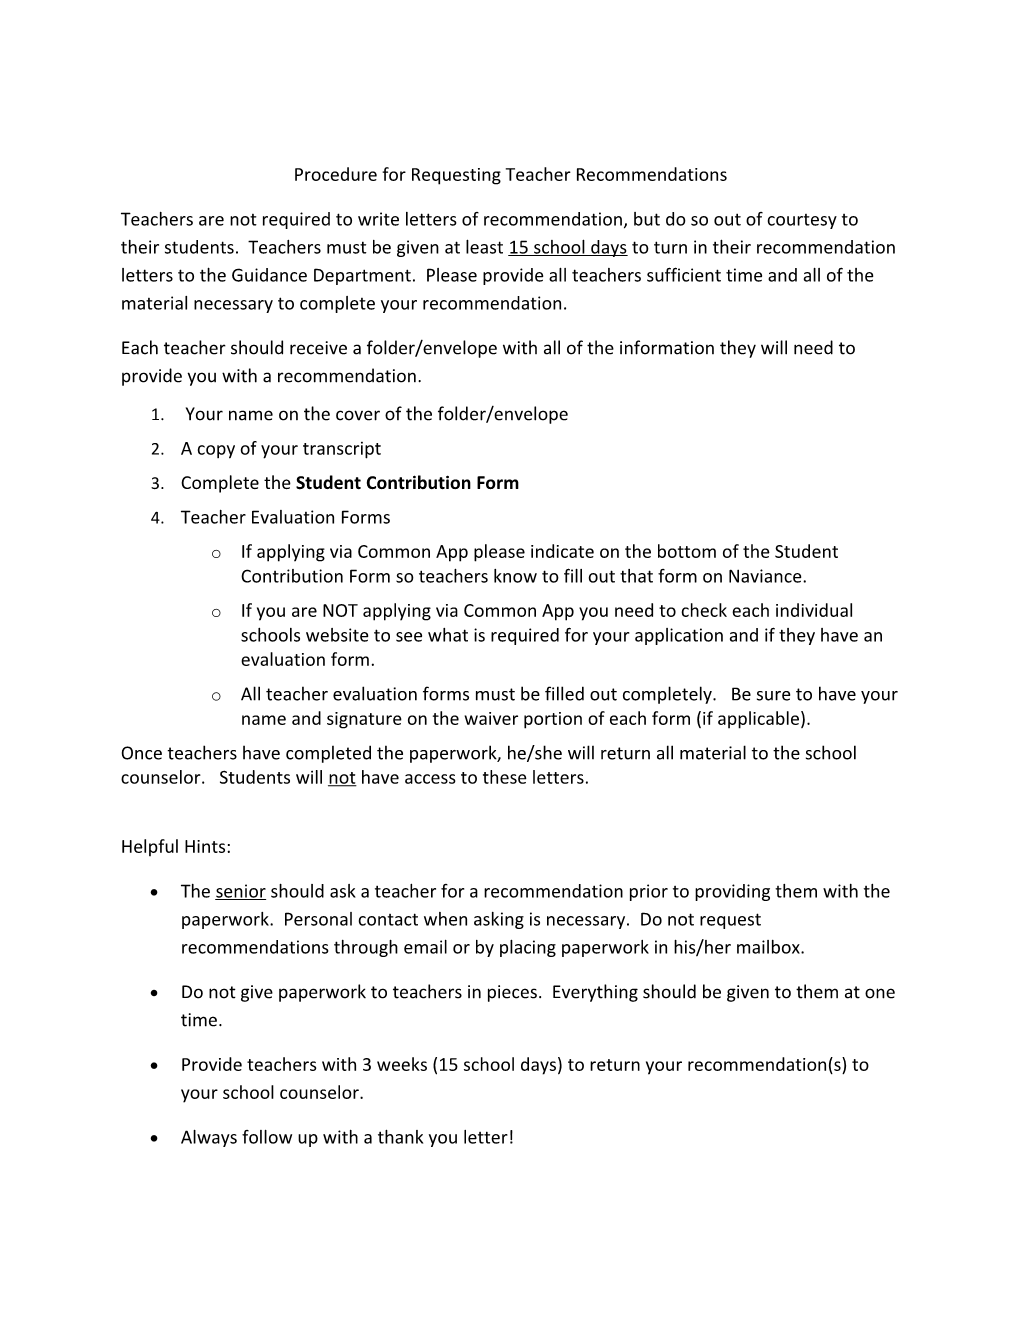 Procedure for Requesting Teacher Recommendations